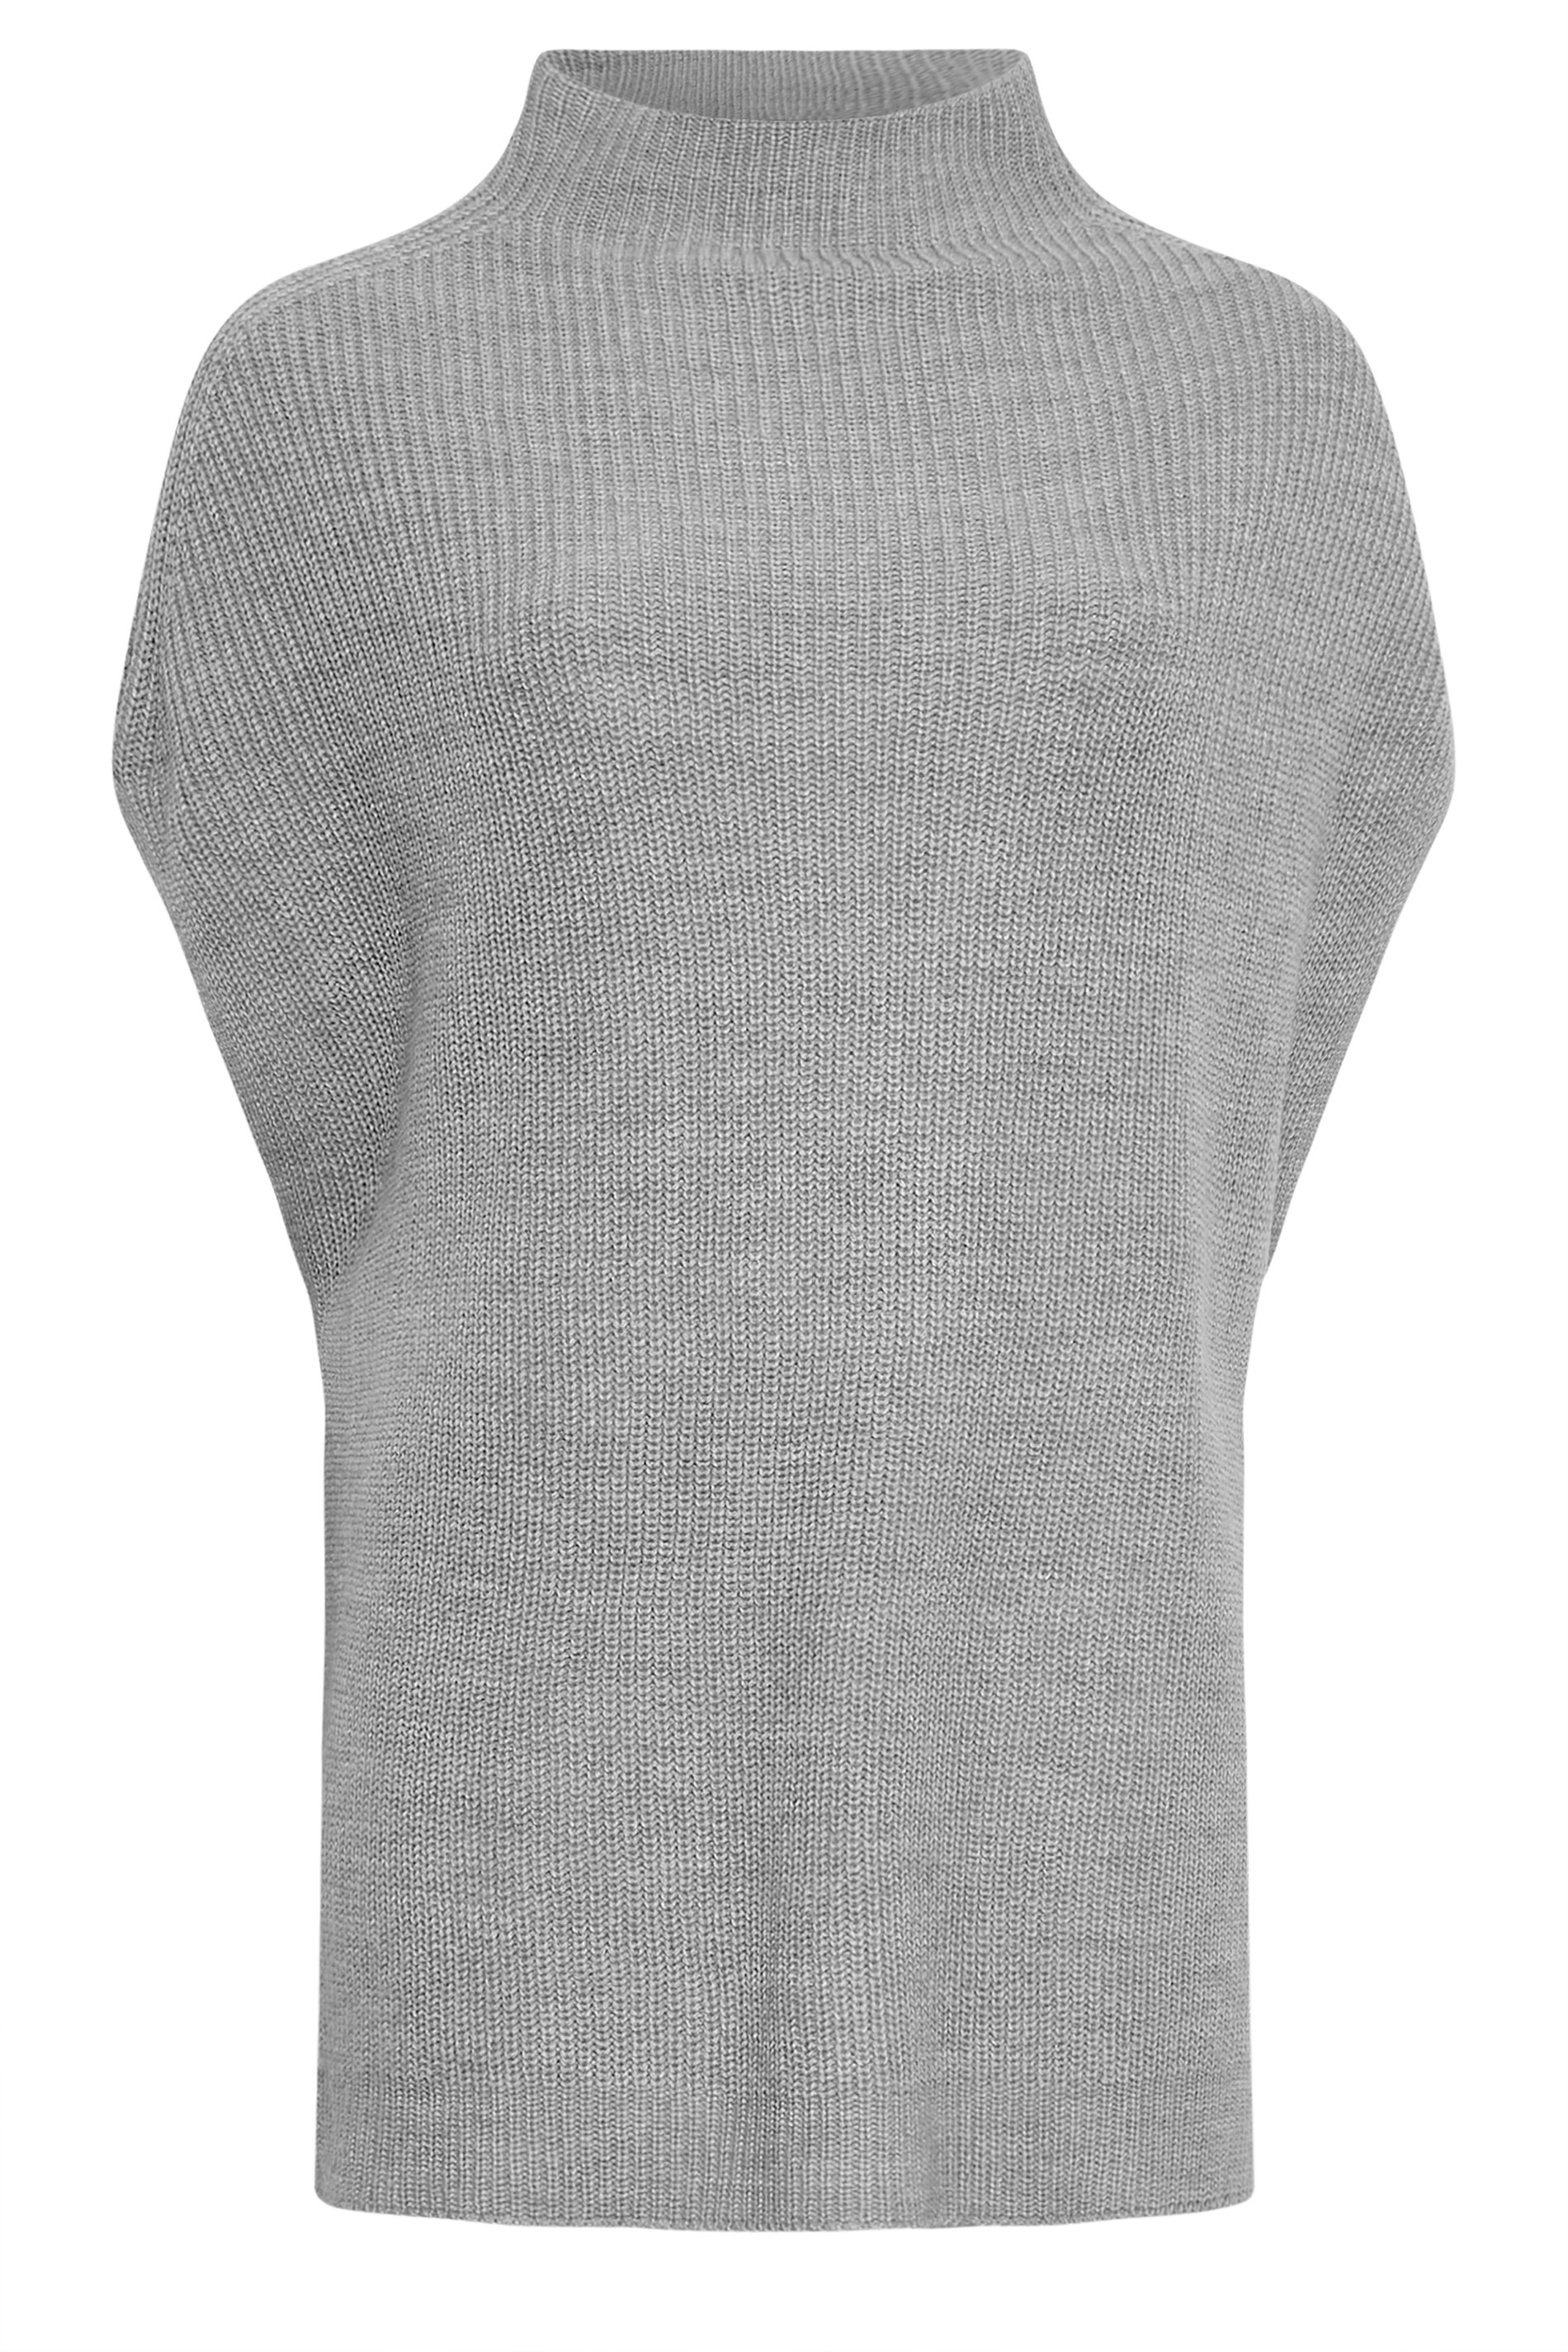 YOURS Plus Size Grey High Neck Knitted Vest Top | Yours Clothing